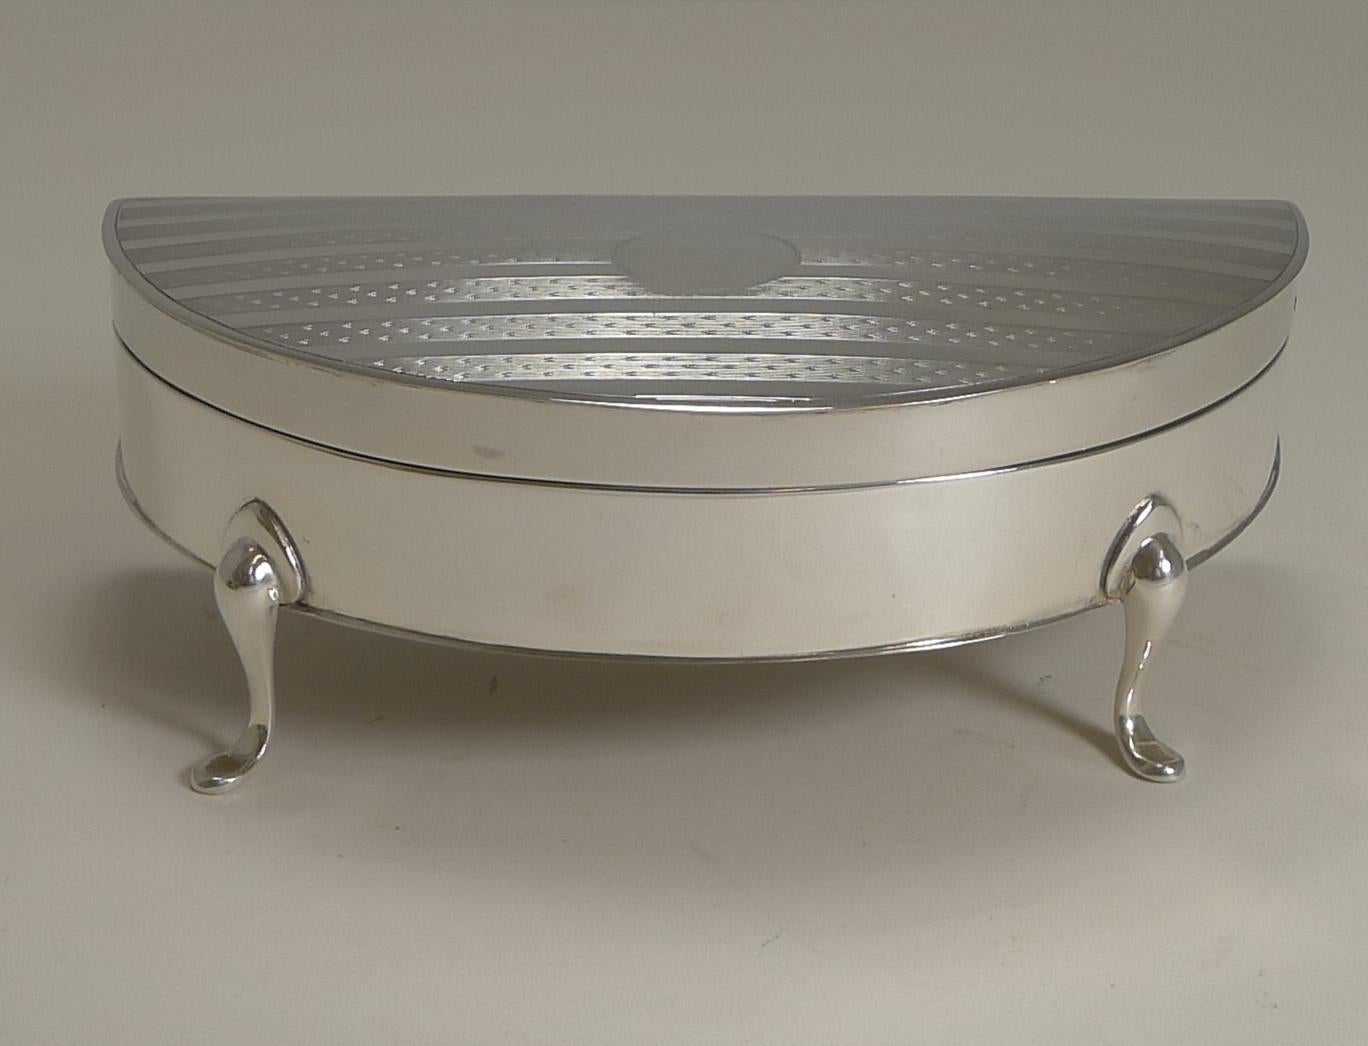 A very elegant large jewelry box, perfect for both a lady or gentleman to keep anything from Diamonds to cufflinks. The demilune form stands on form elegant cabriole legs and the lid is beautifully decorated with engine turning surrounding a central